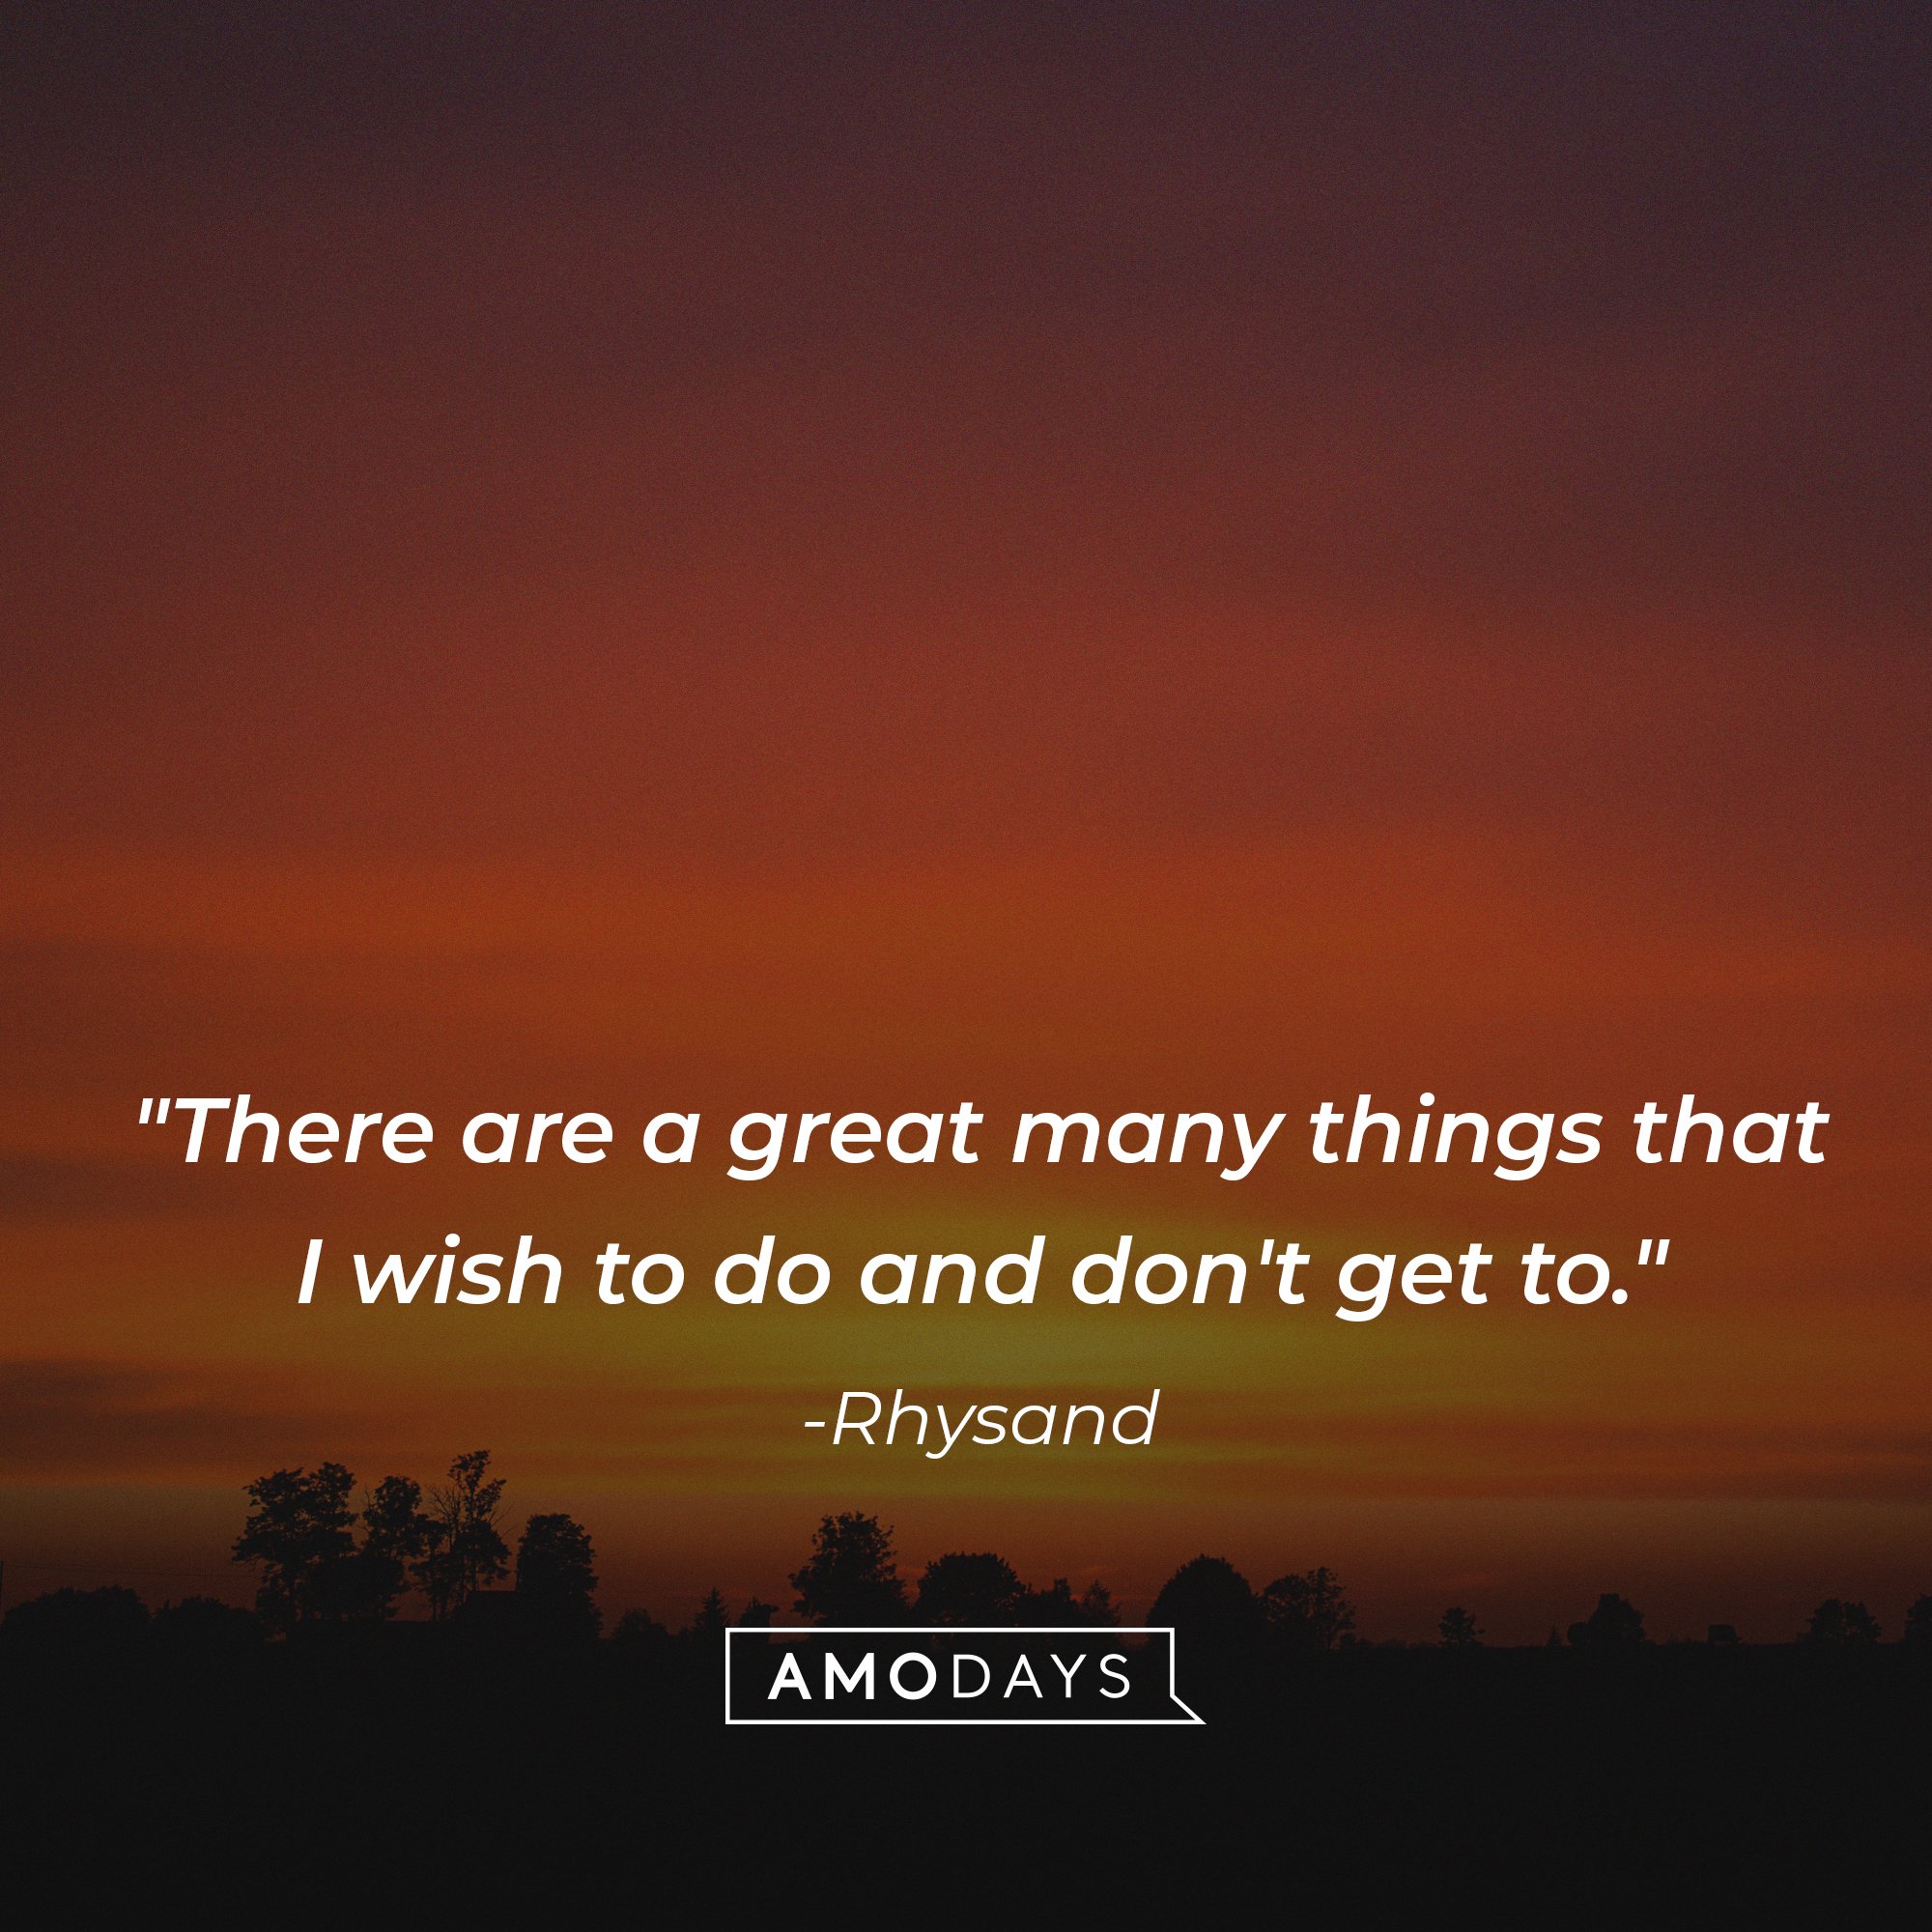 Rhysand’s quote: "There are a great many things that I wish to do and don't get to." |  Image: AmoDays